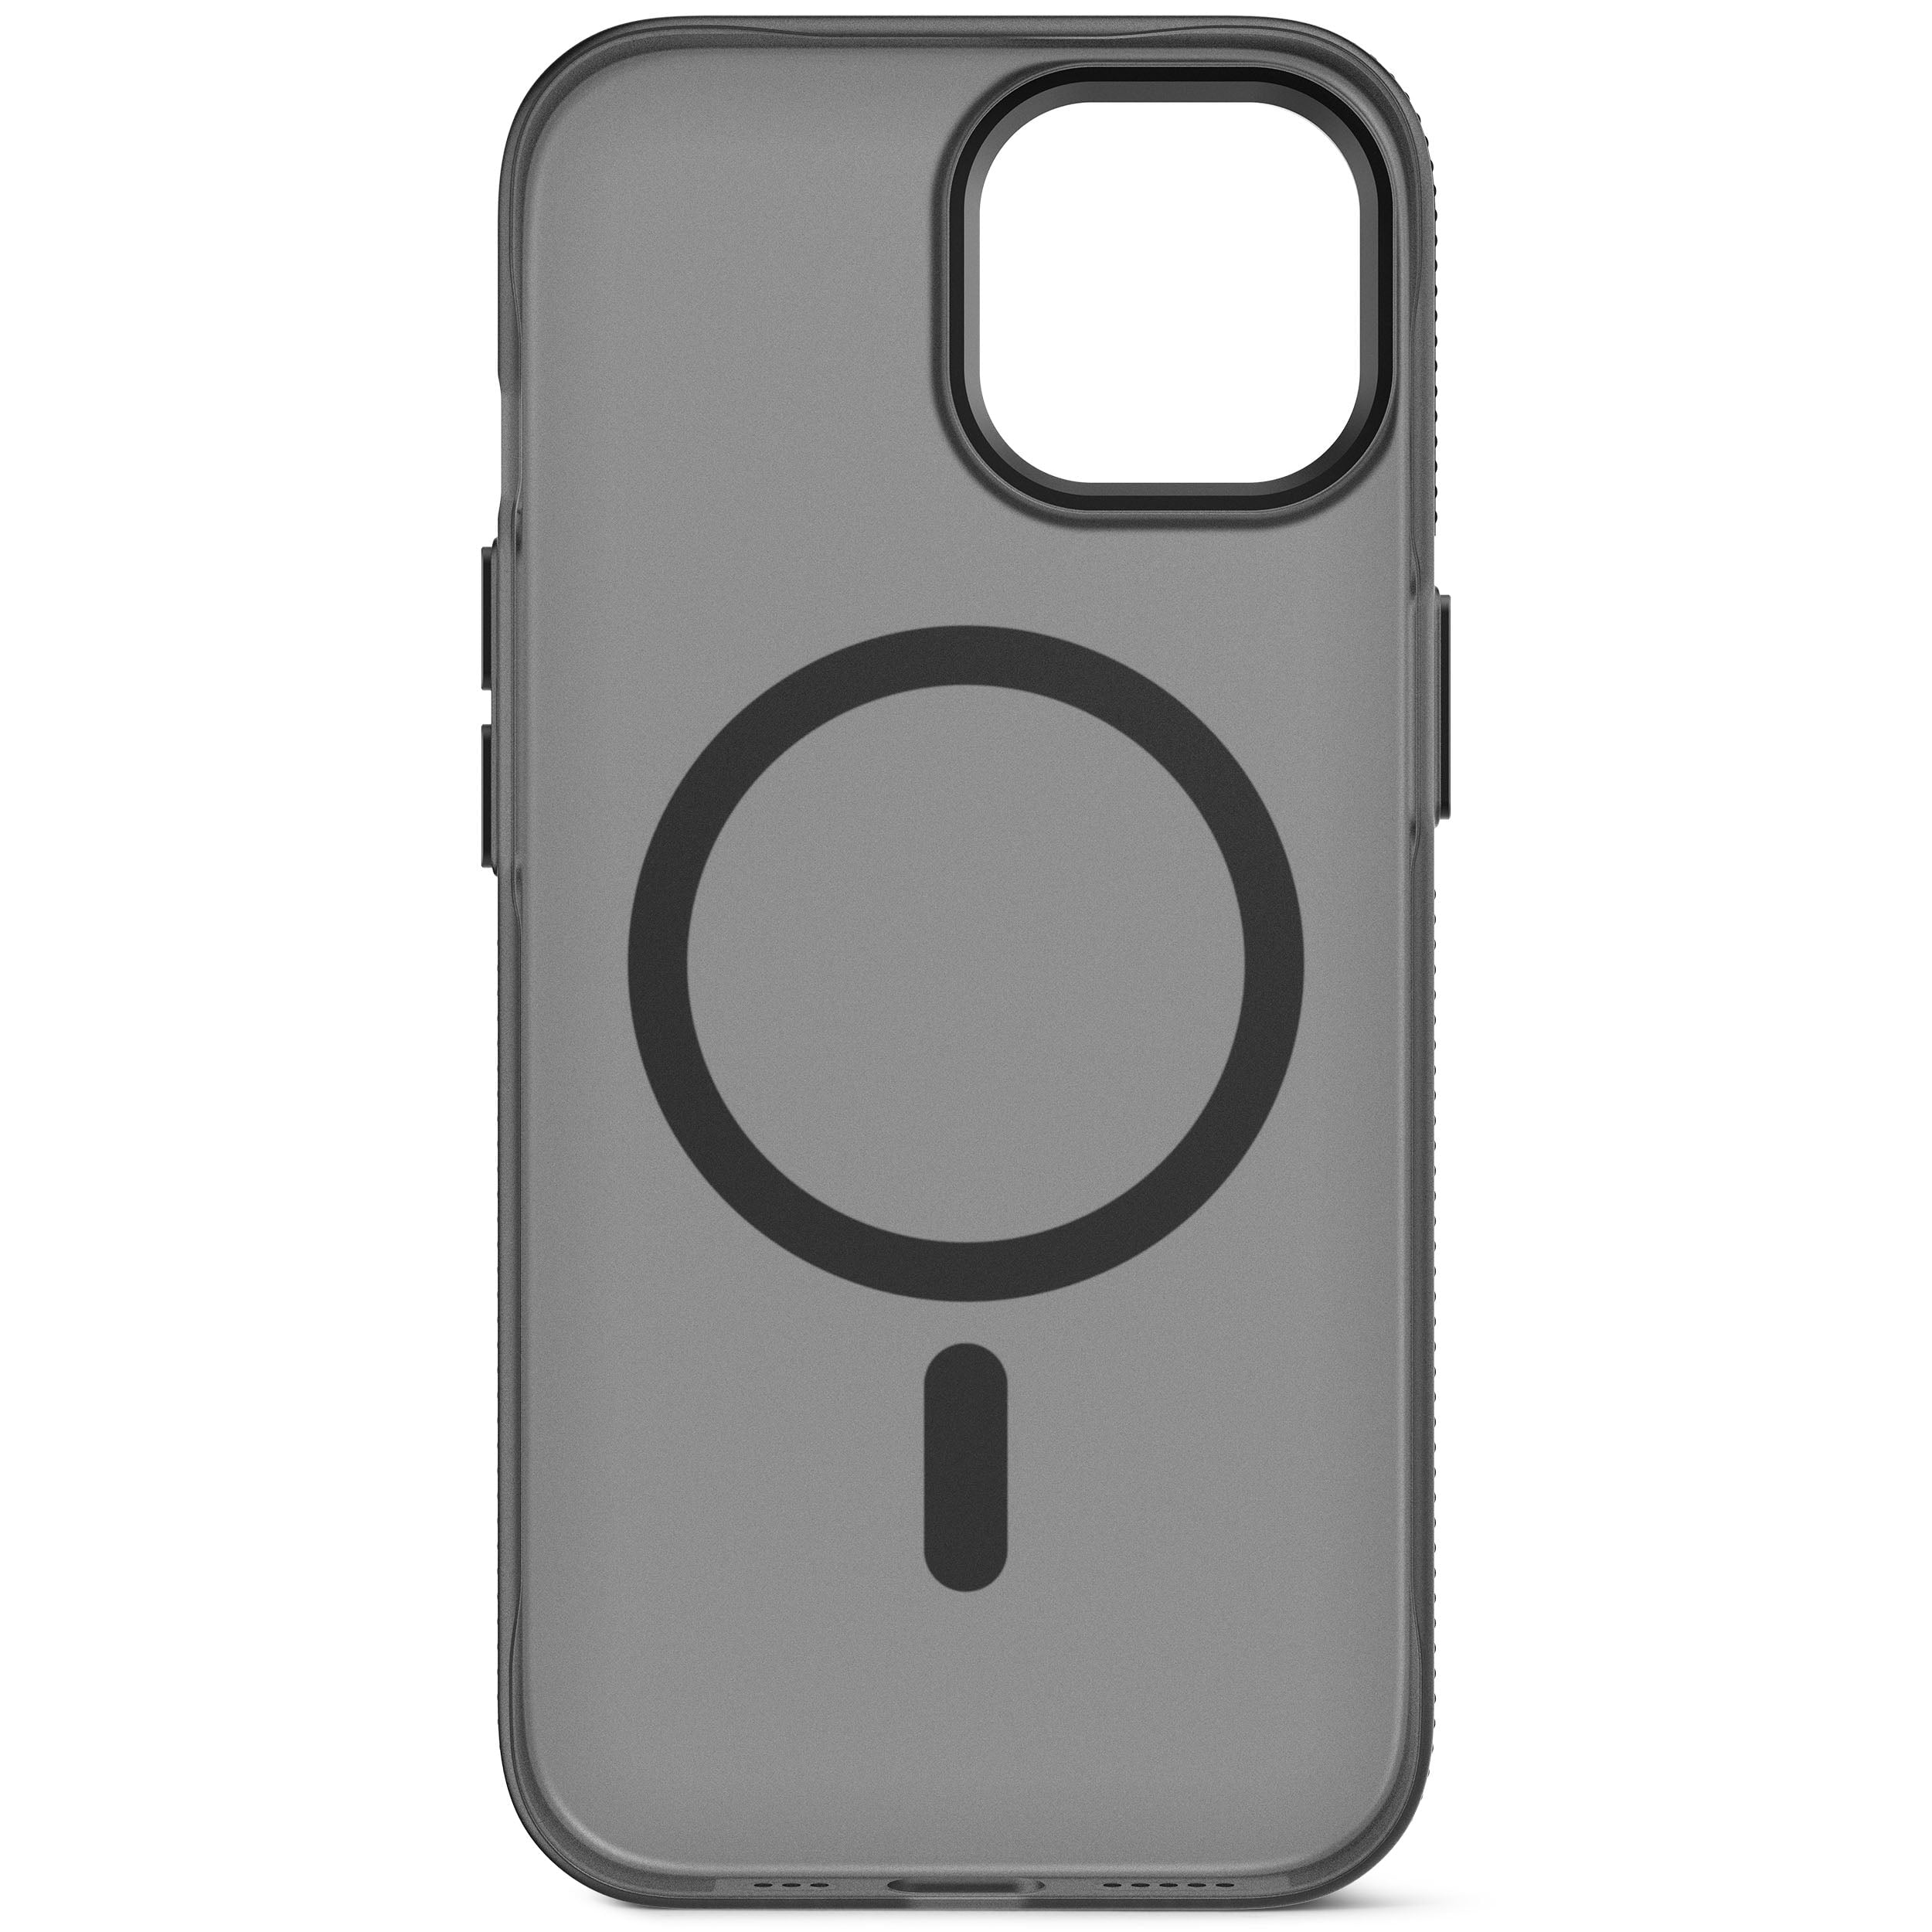 Recycled Plastic Grip Case | Transparant Black